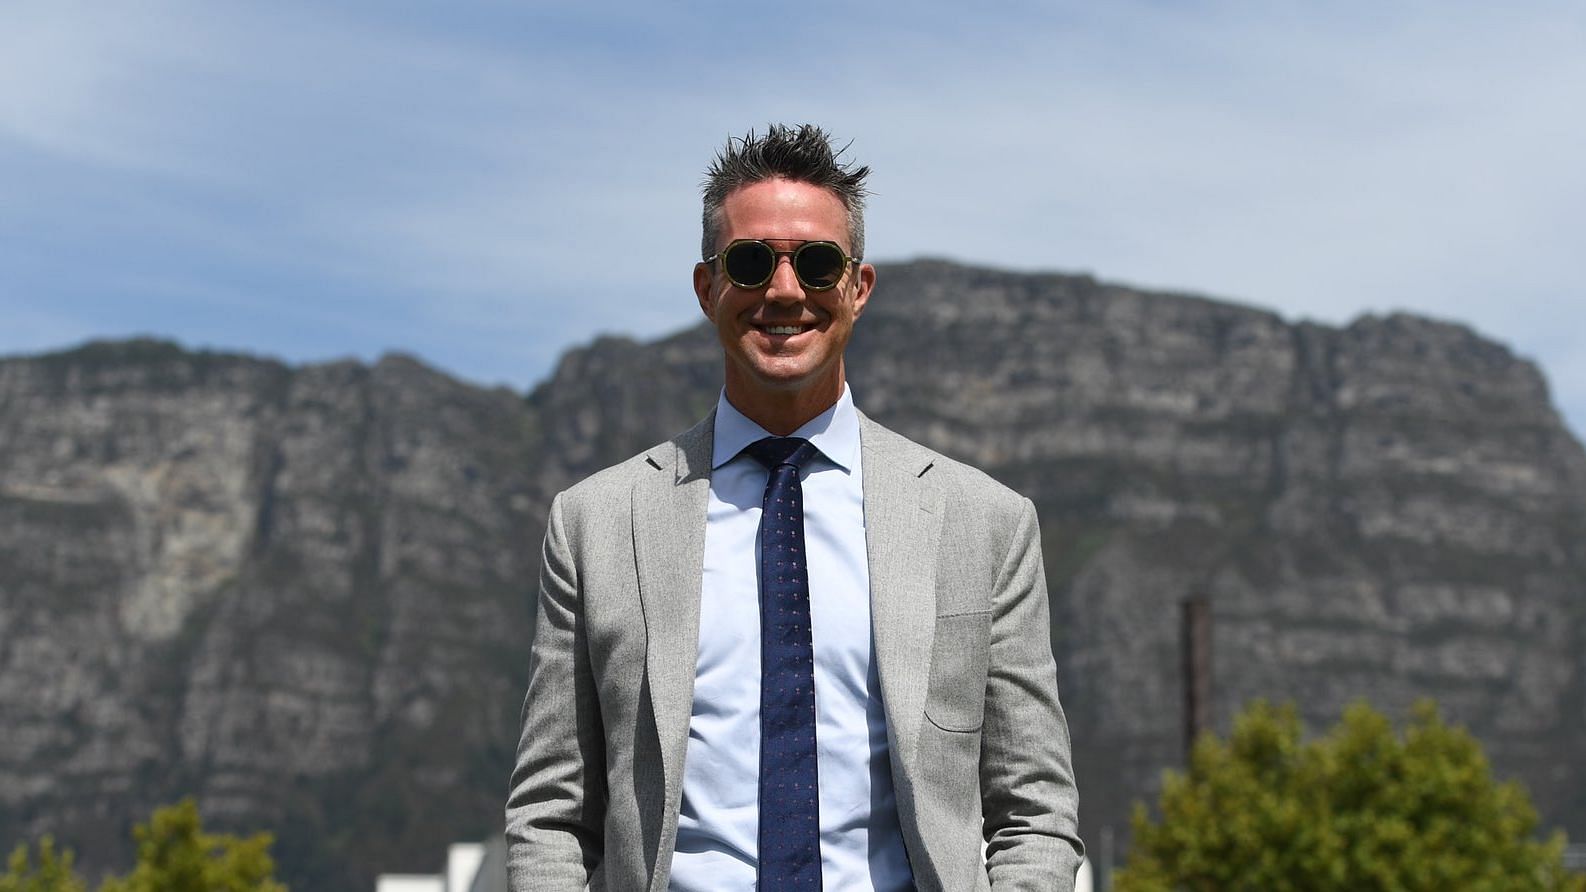 Kevin Pietersen says the lockdown has forced him to clean toilets.